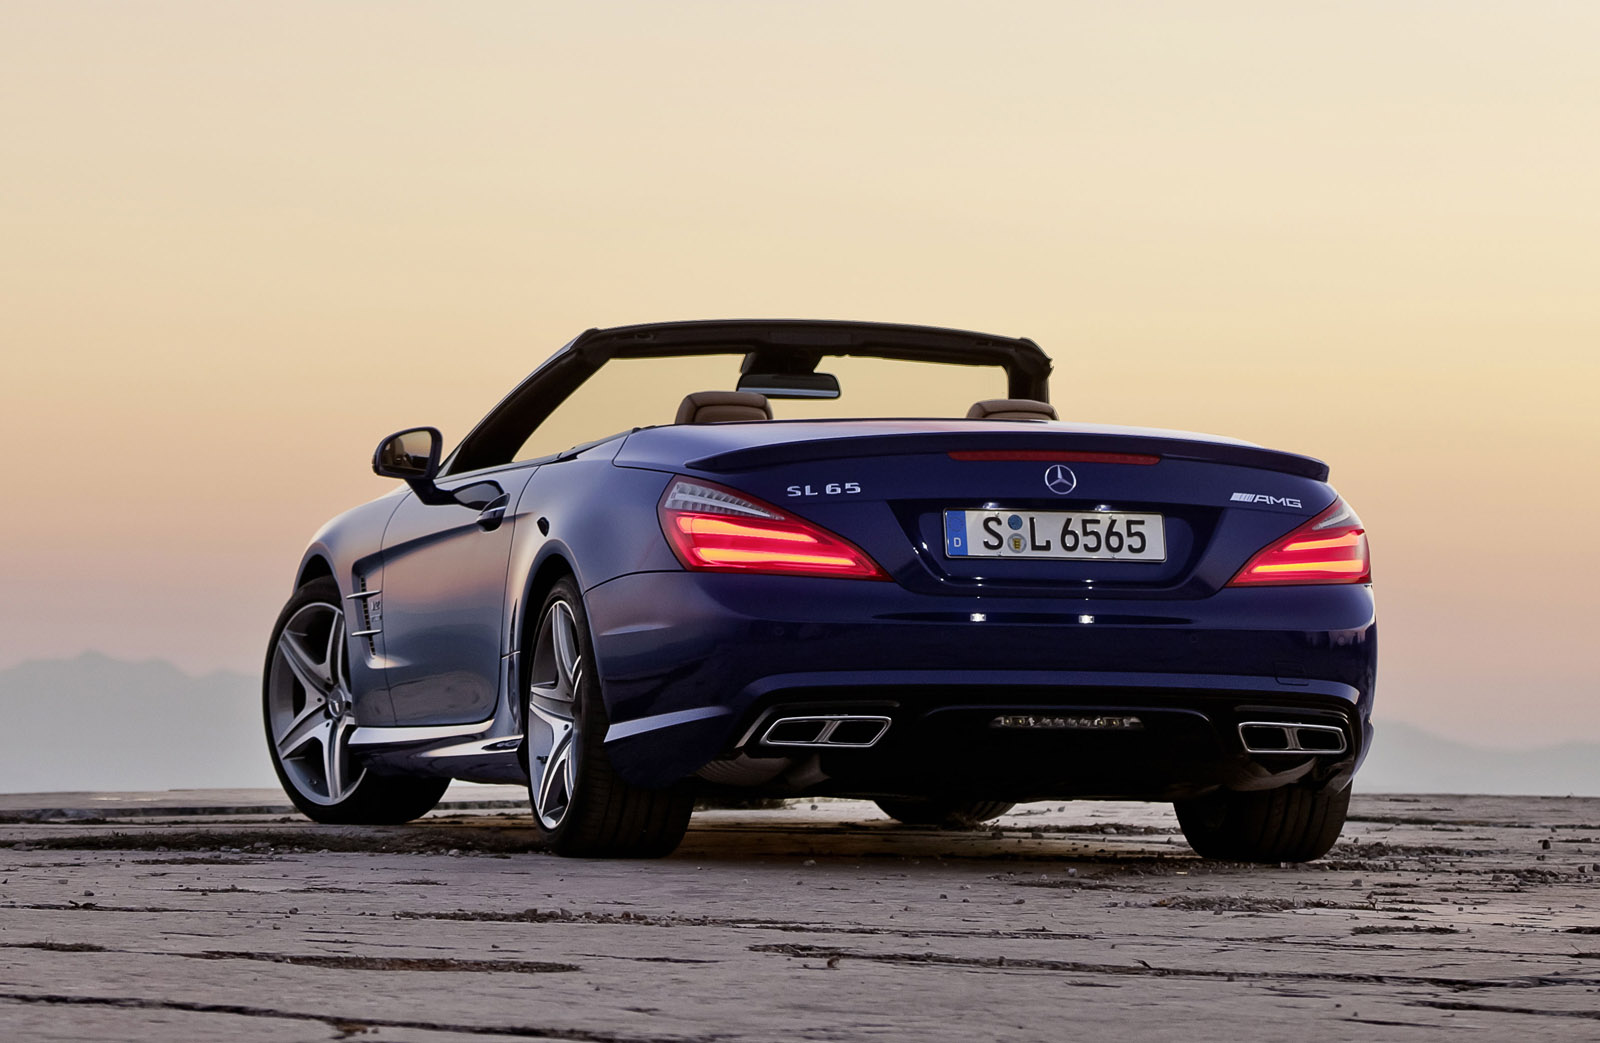 Mercedes-benz Amg 2013: Review, Amazing Pictures and Images – Look at